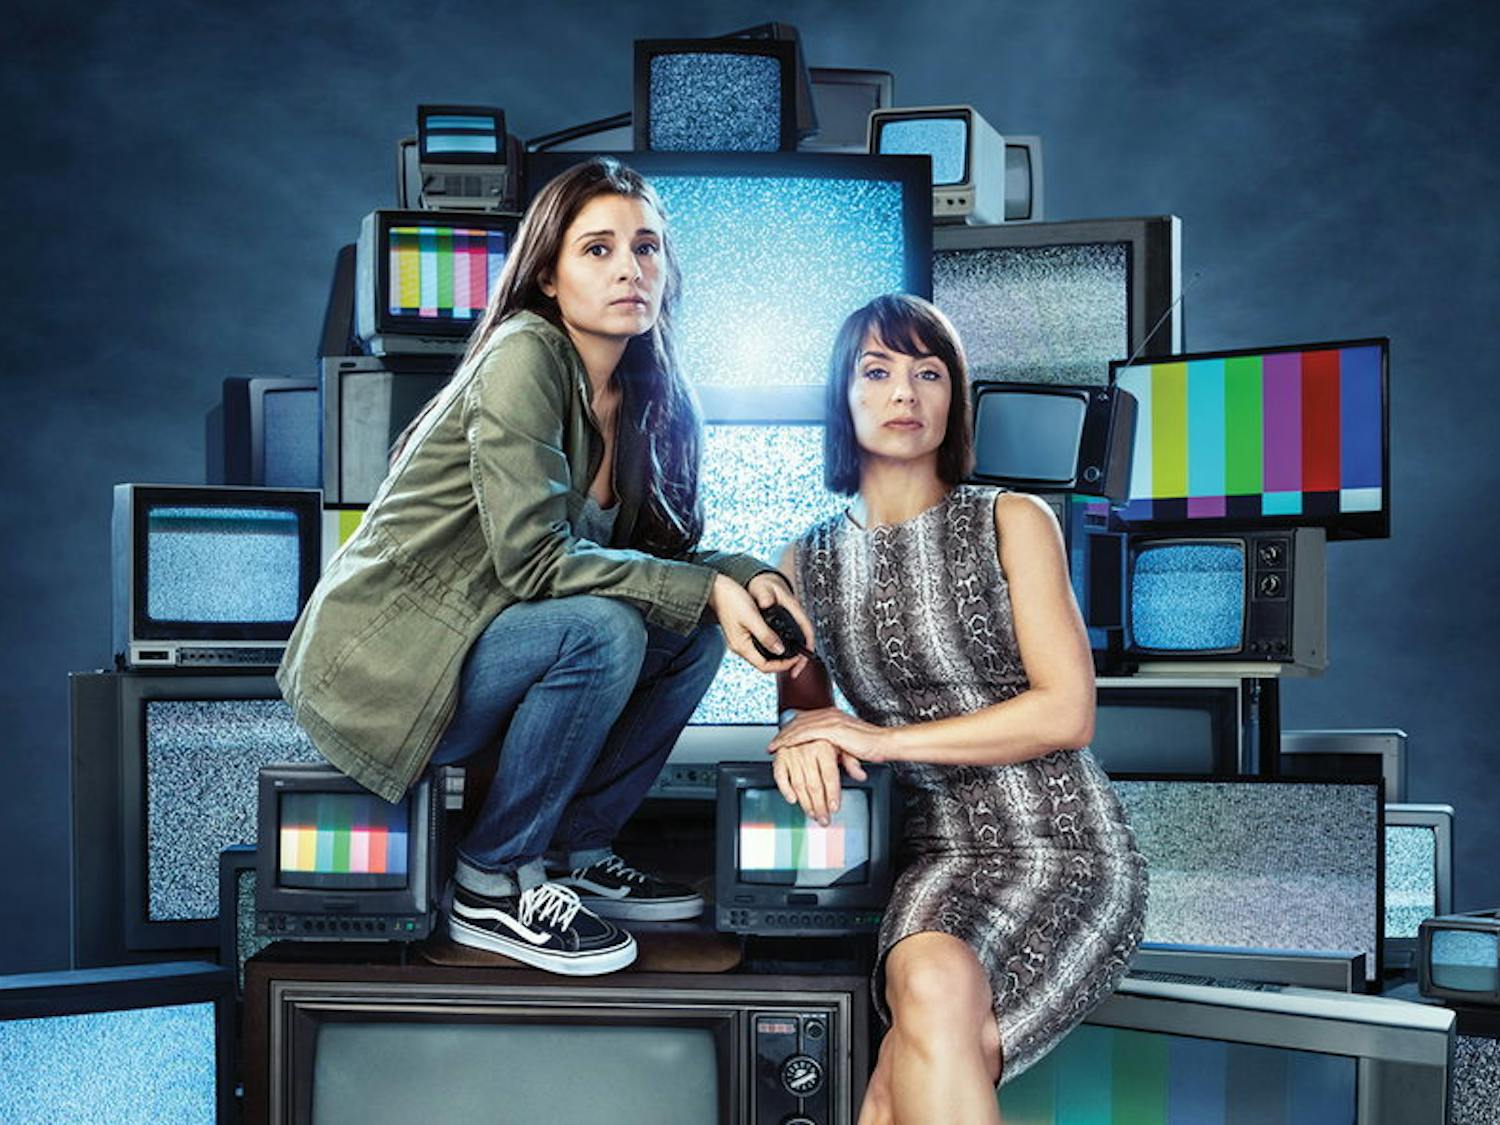 The white feminism of the "UnReal" protagonists is one of many aspects that make them two of TV’s greatest anti-heroes.